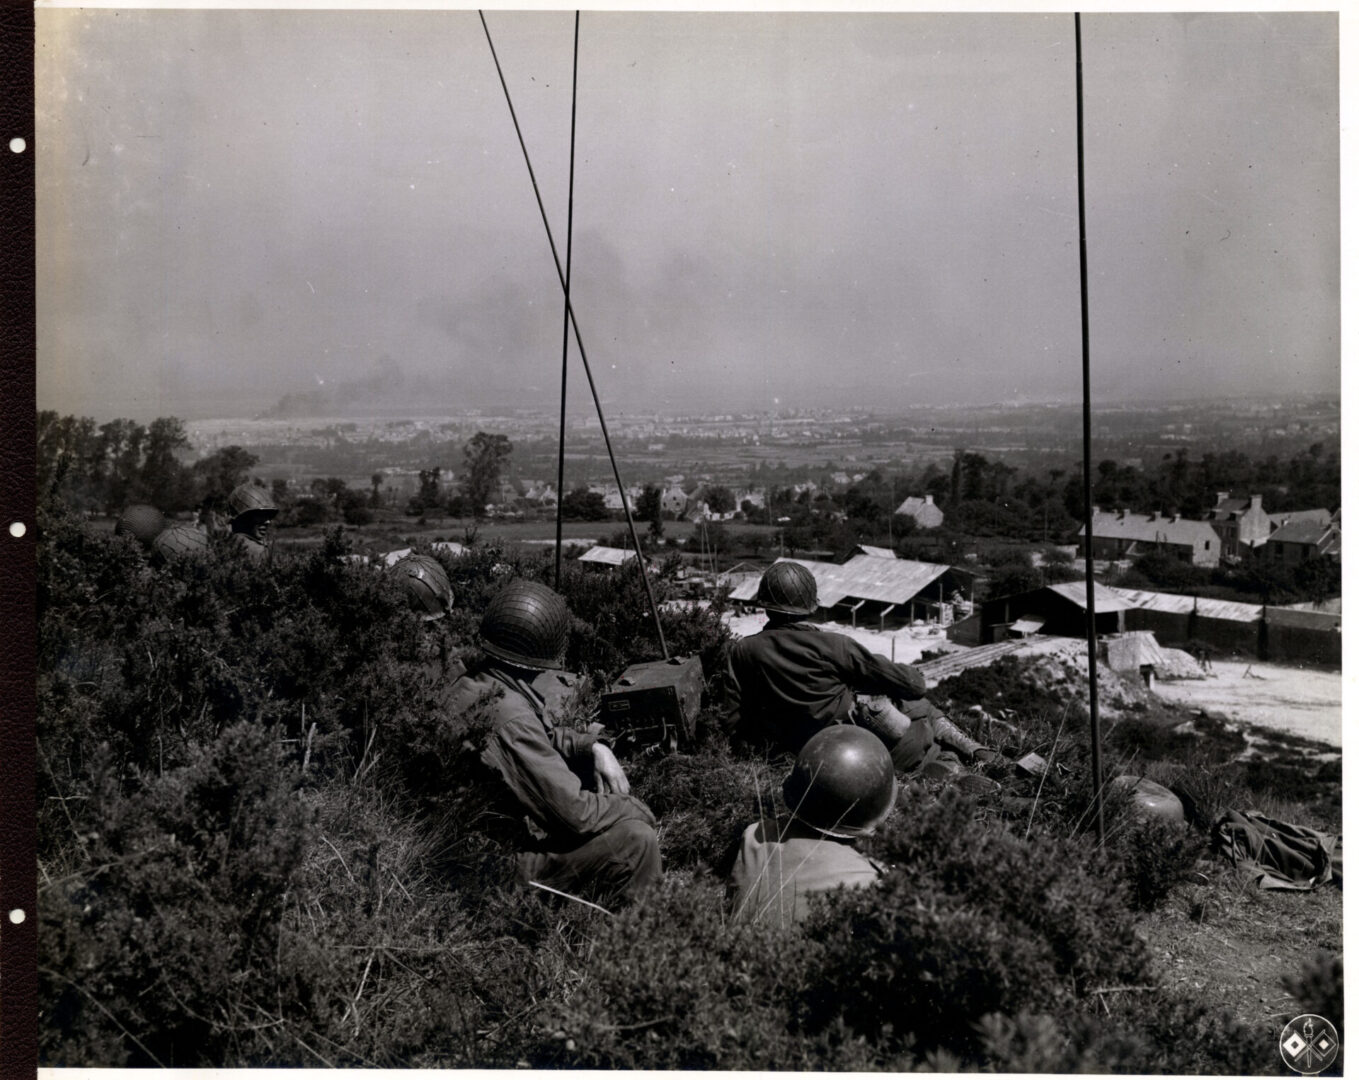 U.S. artillery officers engaged in shelling activity